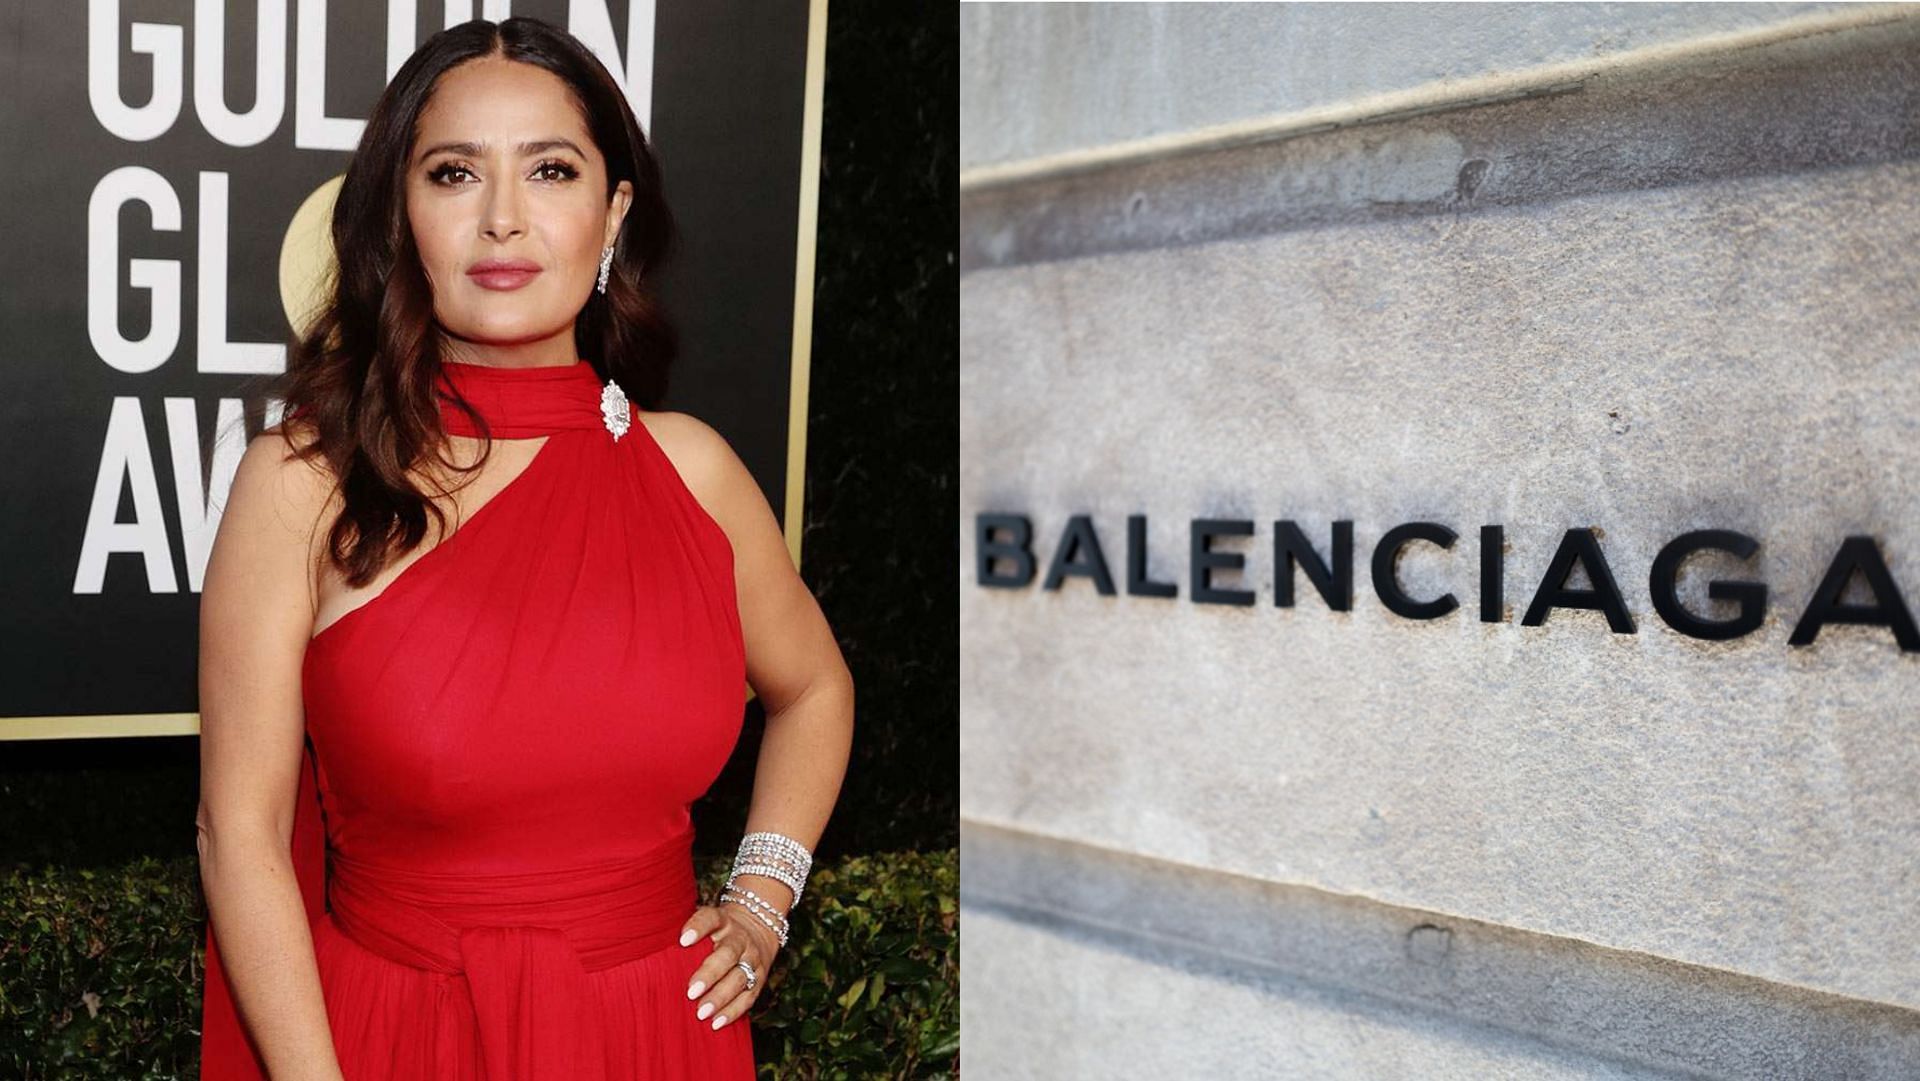 Why is Salma Hayek being dragged into the Balenciaga scandal? Connection  explored as actress comes under fire online